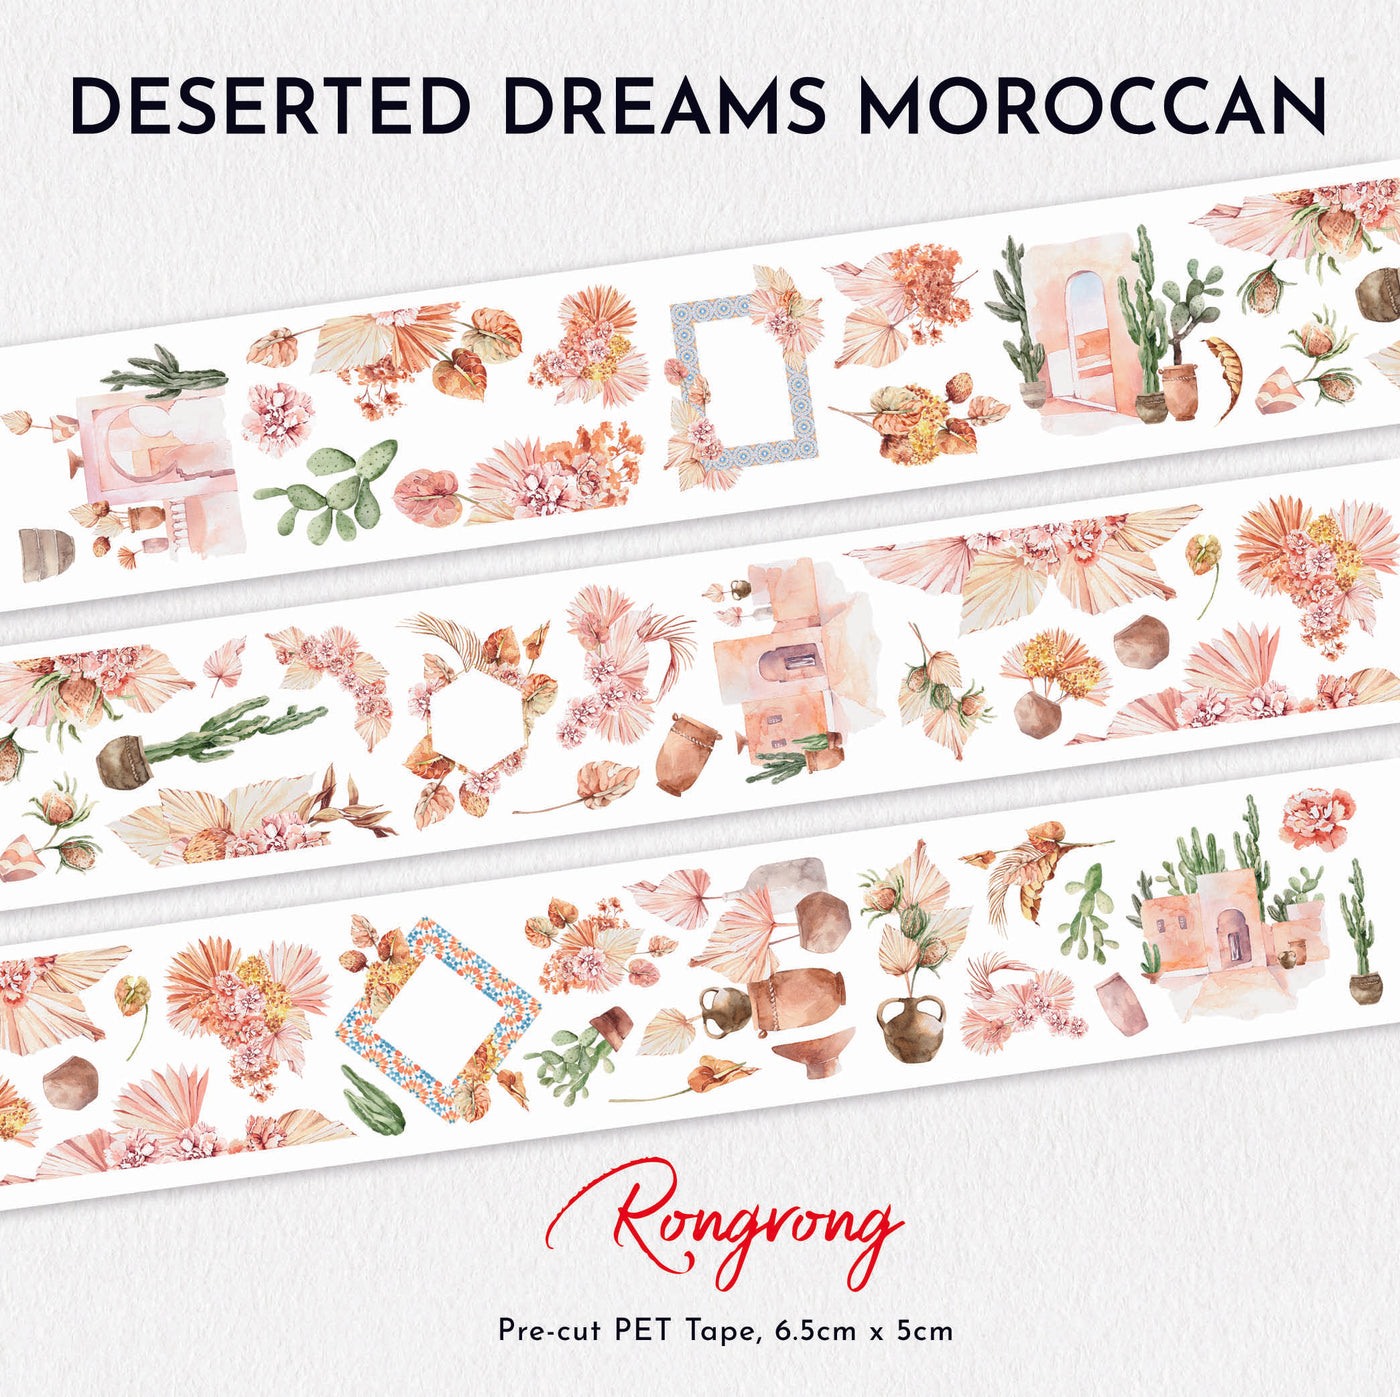 Shop Rongrong Deserted Dreams Moroccan PET Tape for Planner